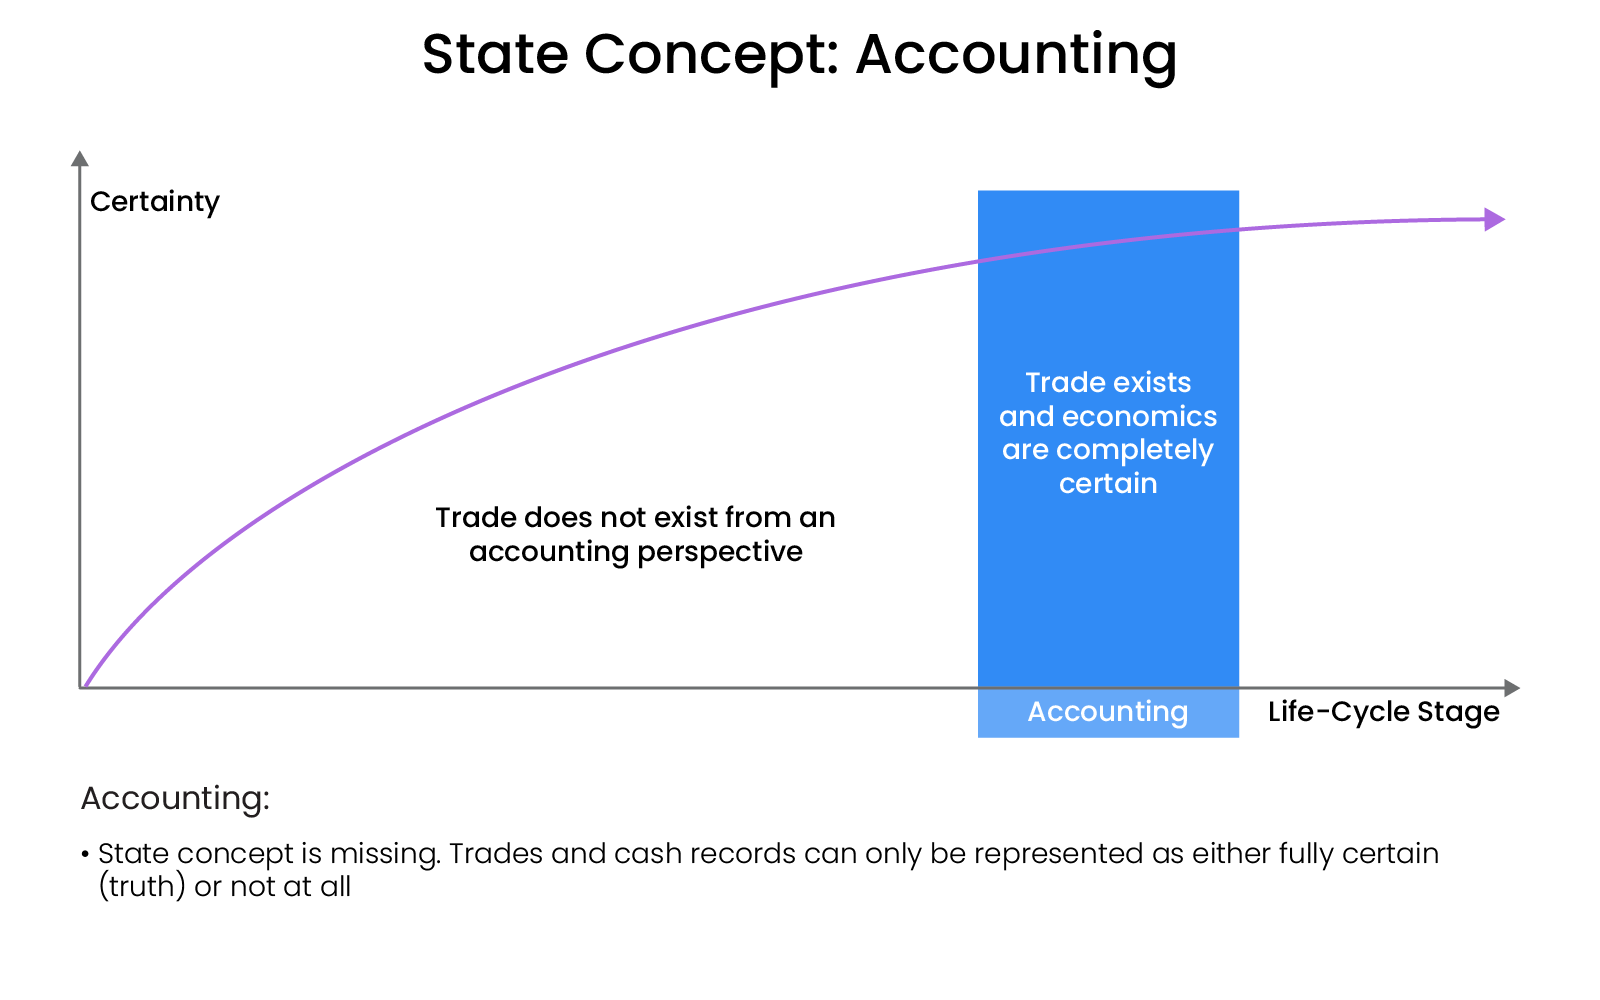 accounting systems can only see trade trade transactions and don’t have a state concept for transaction data